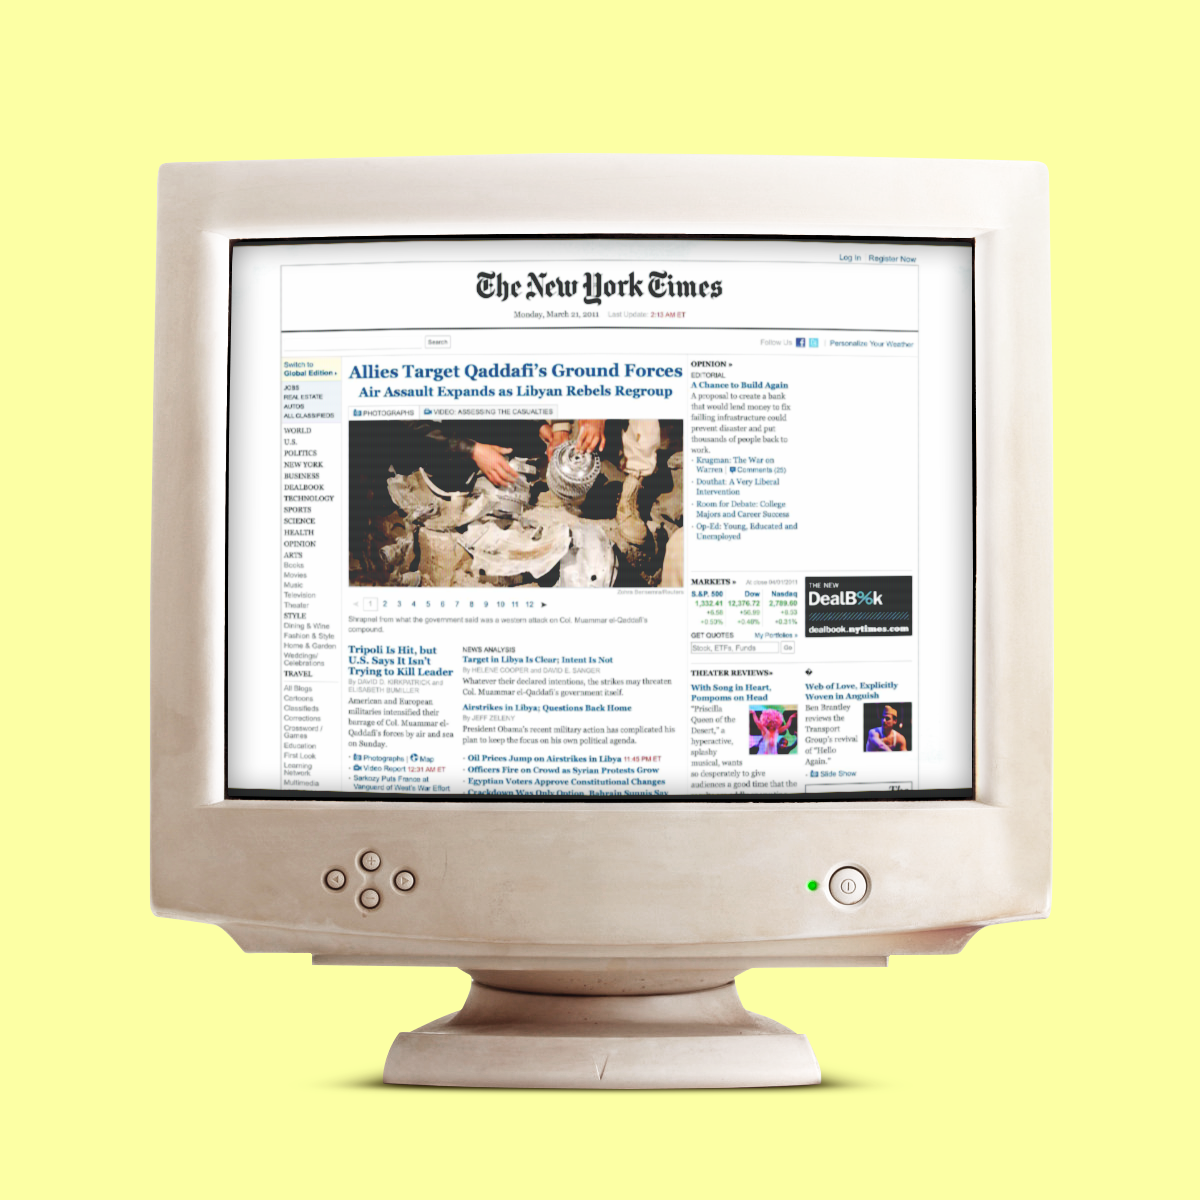 The New York Times website as it appeared on March 21st, 2011, displayed on a dusty old computer monitor from the late 90's for humorous effect.